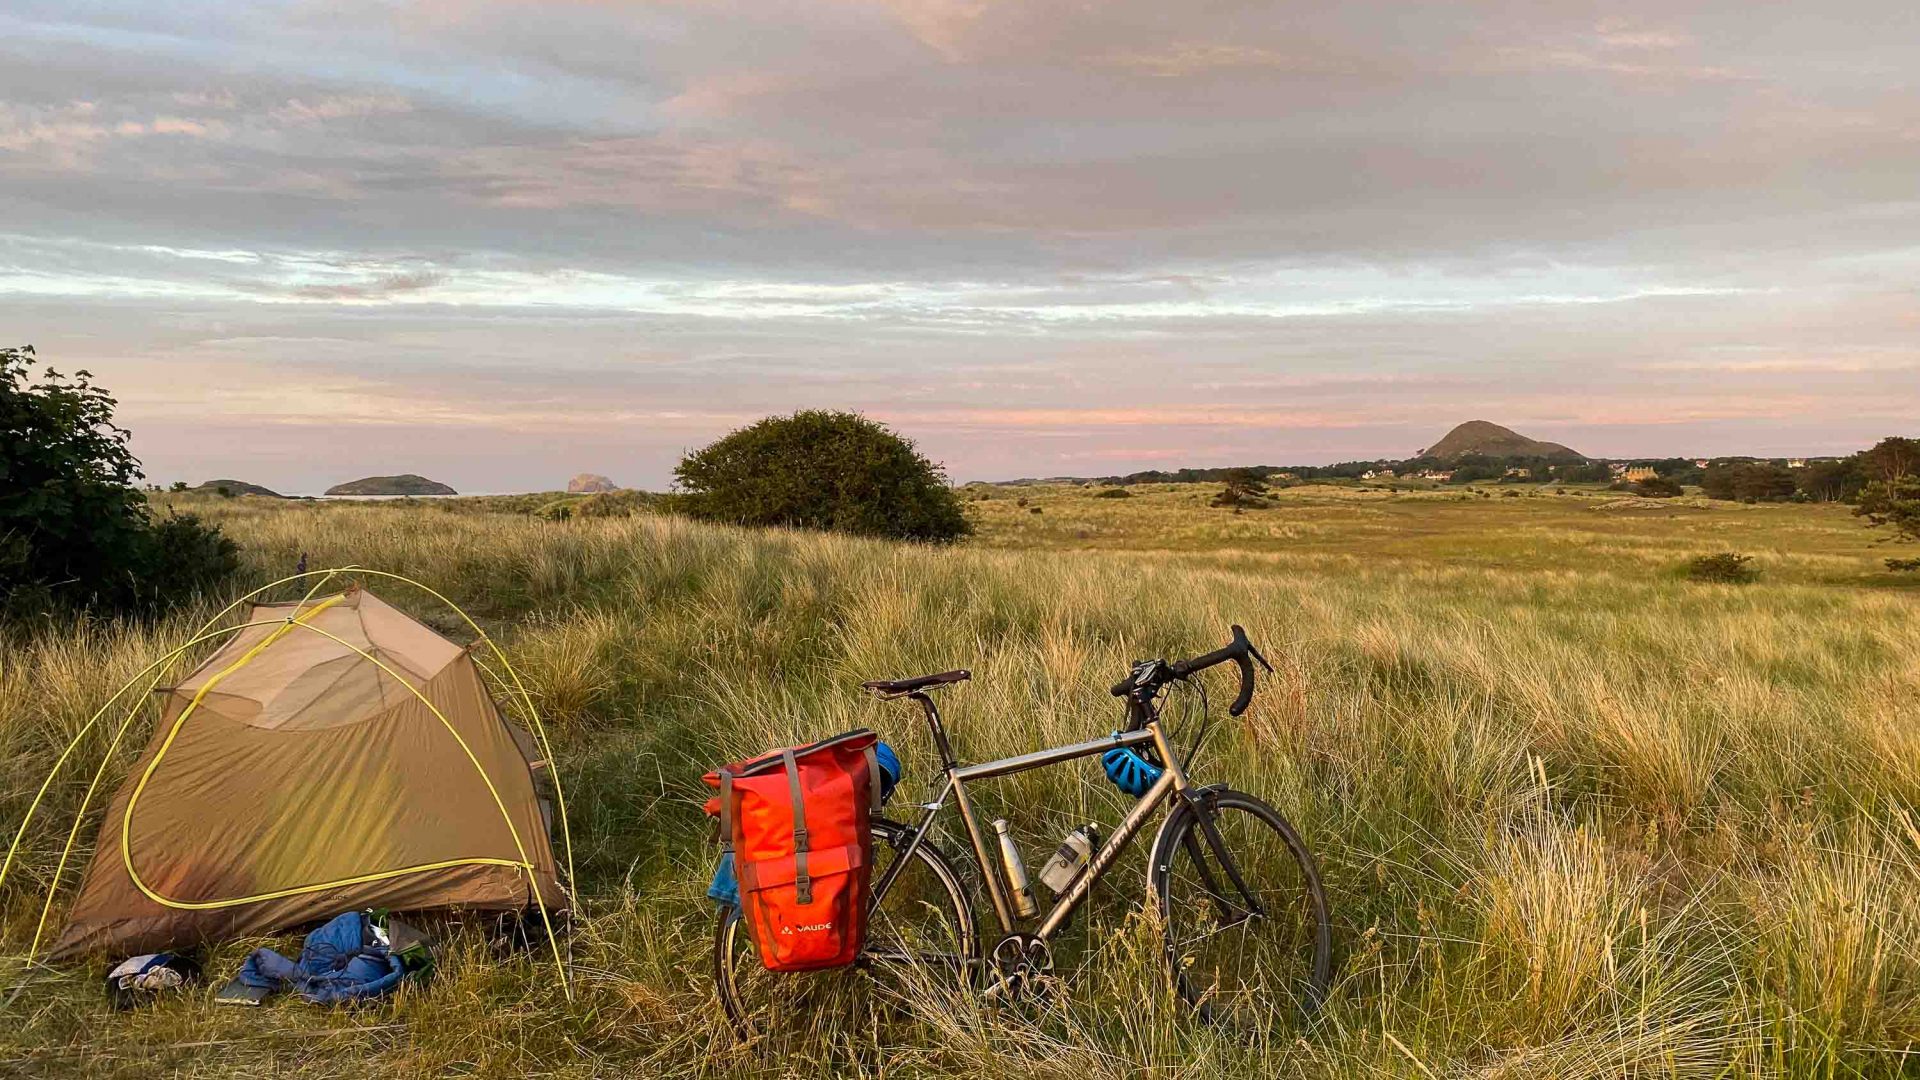 A tent and bike in a field at sunset.